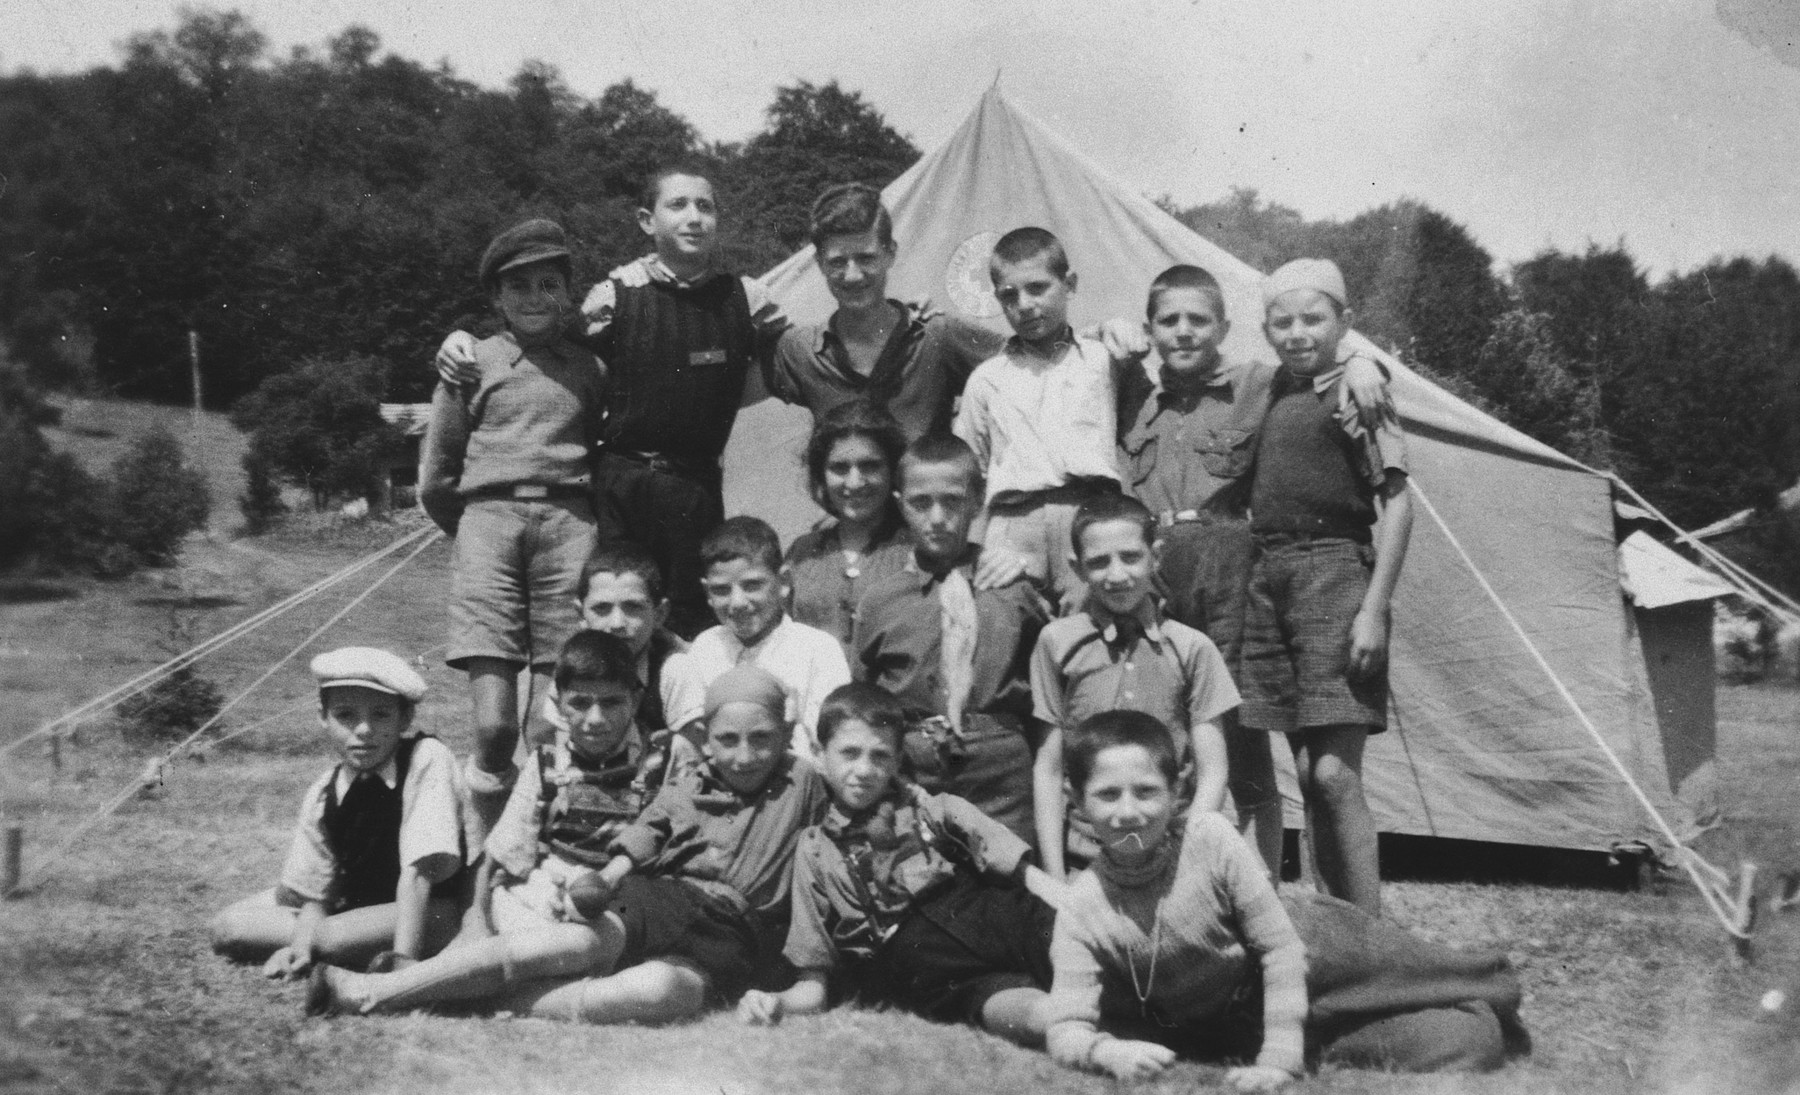 Bulgarian-Jewish children attend a summer camp sponsored by the Zionist movement, Hehalutz, in Plovdiv.